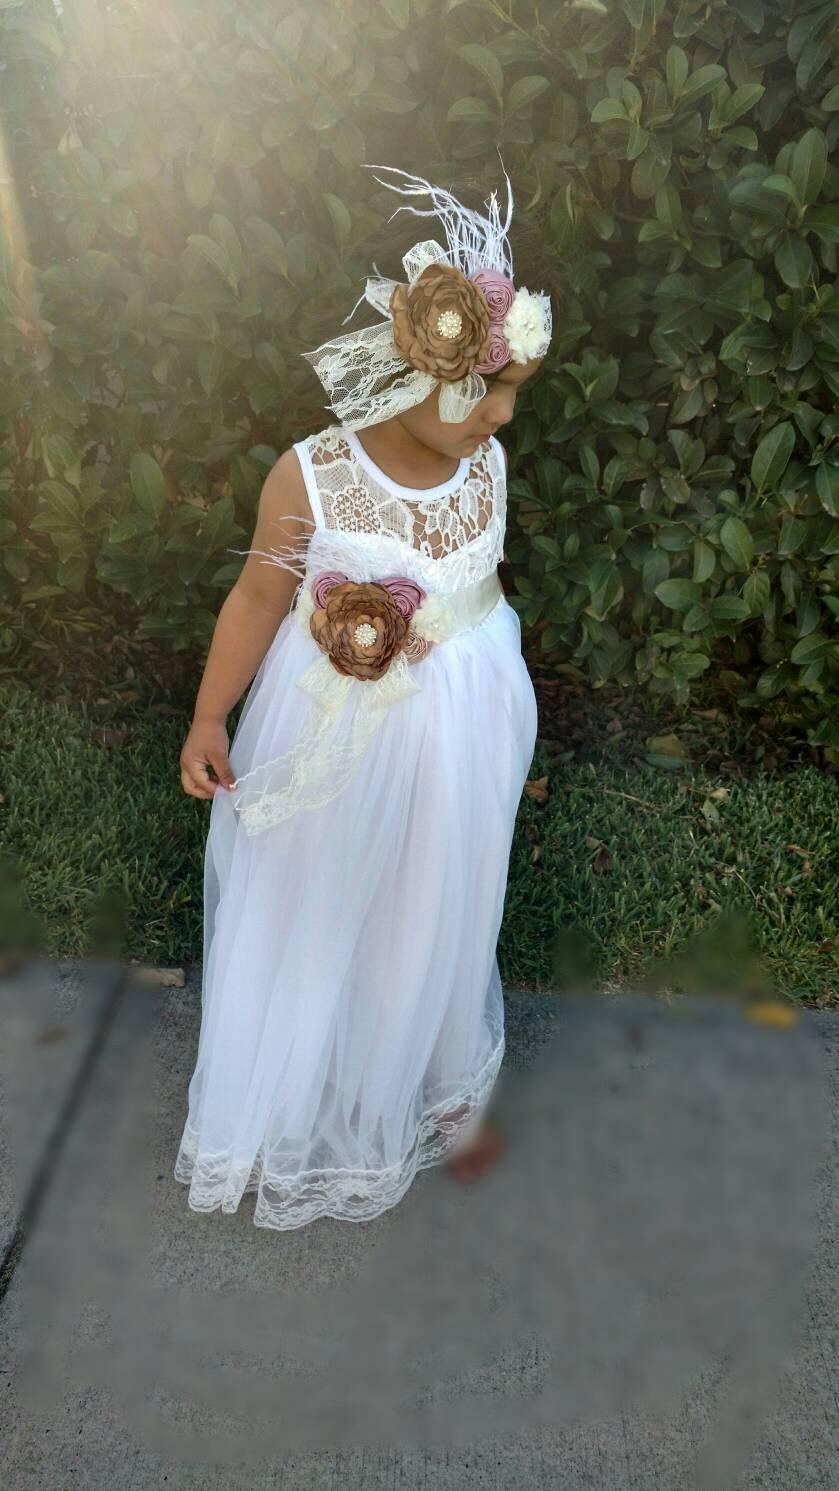 Wedding - Perfect White Tulle with Ivory Lace Flowergirl Dress for Wedding Christening Baptism  Birthday Party or any Special Occasions.